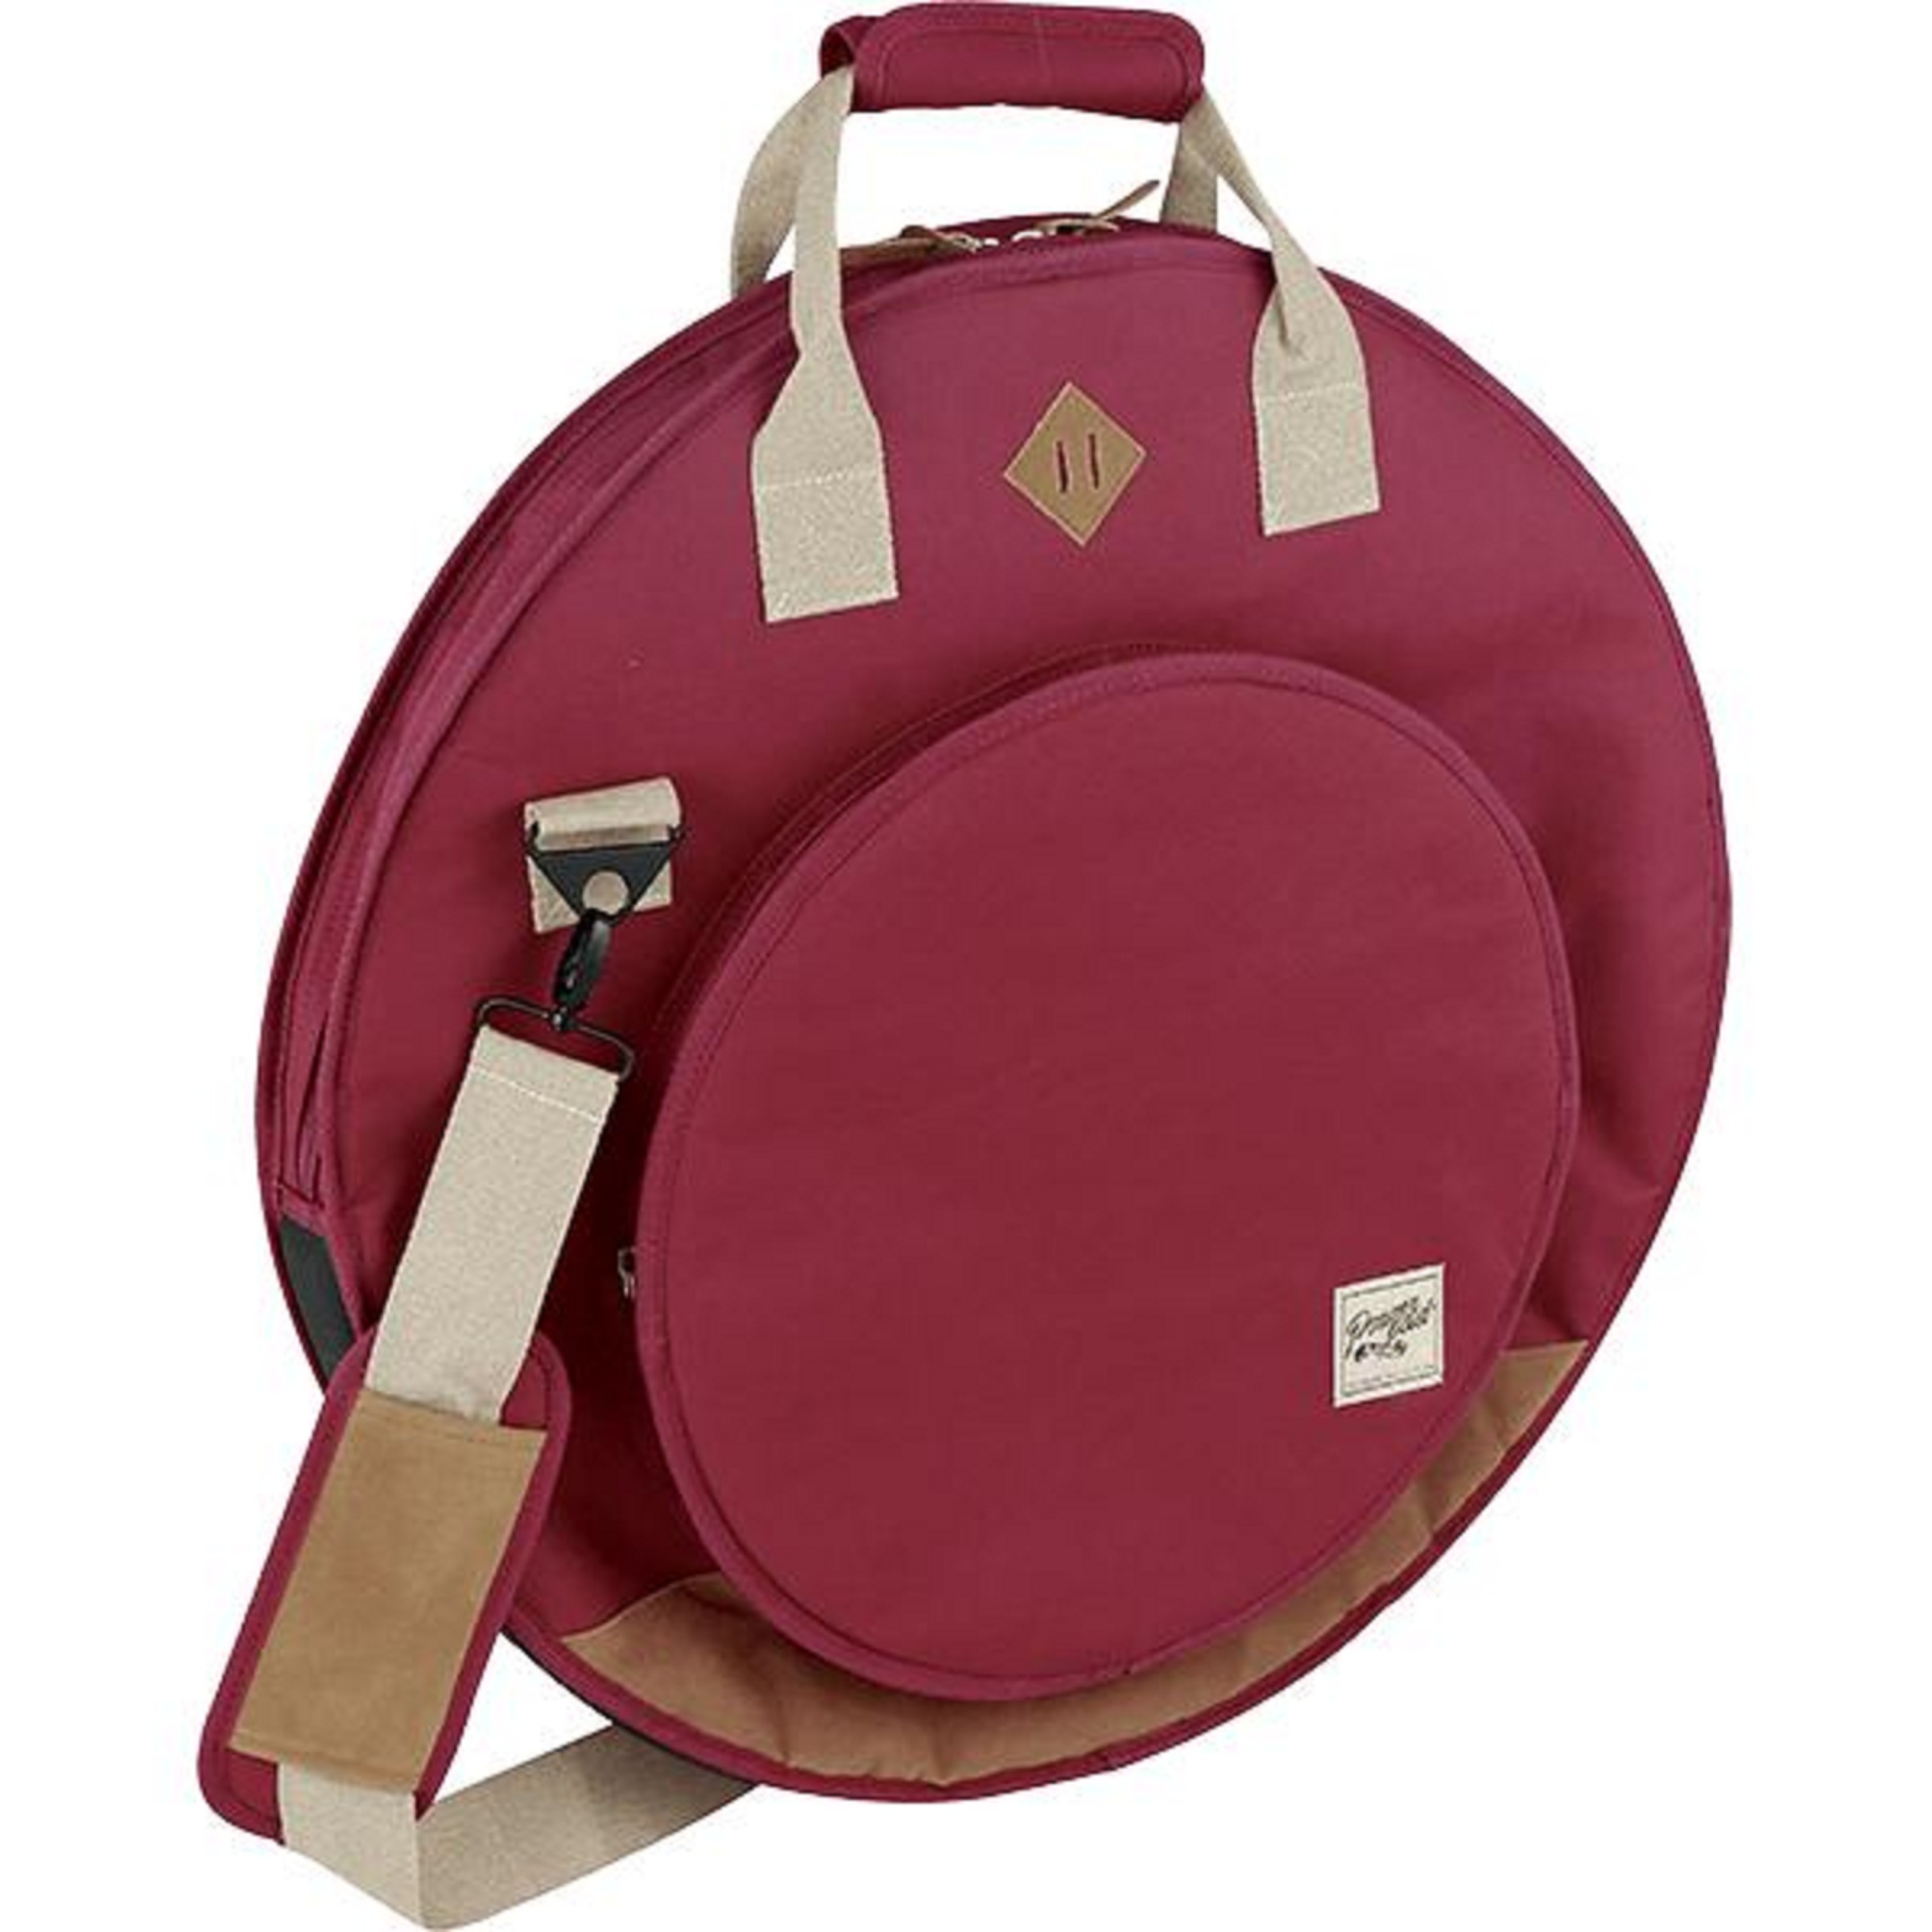 Tama TCB22WR Cymbal Bag Designer Collection Wine Red